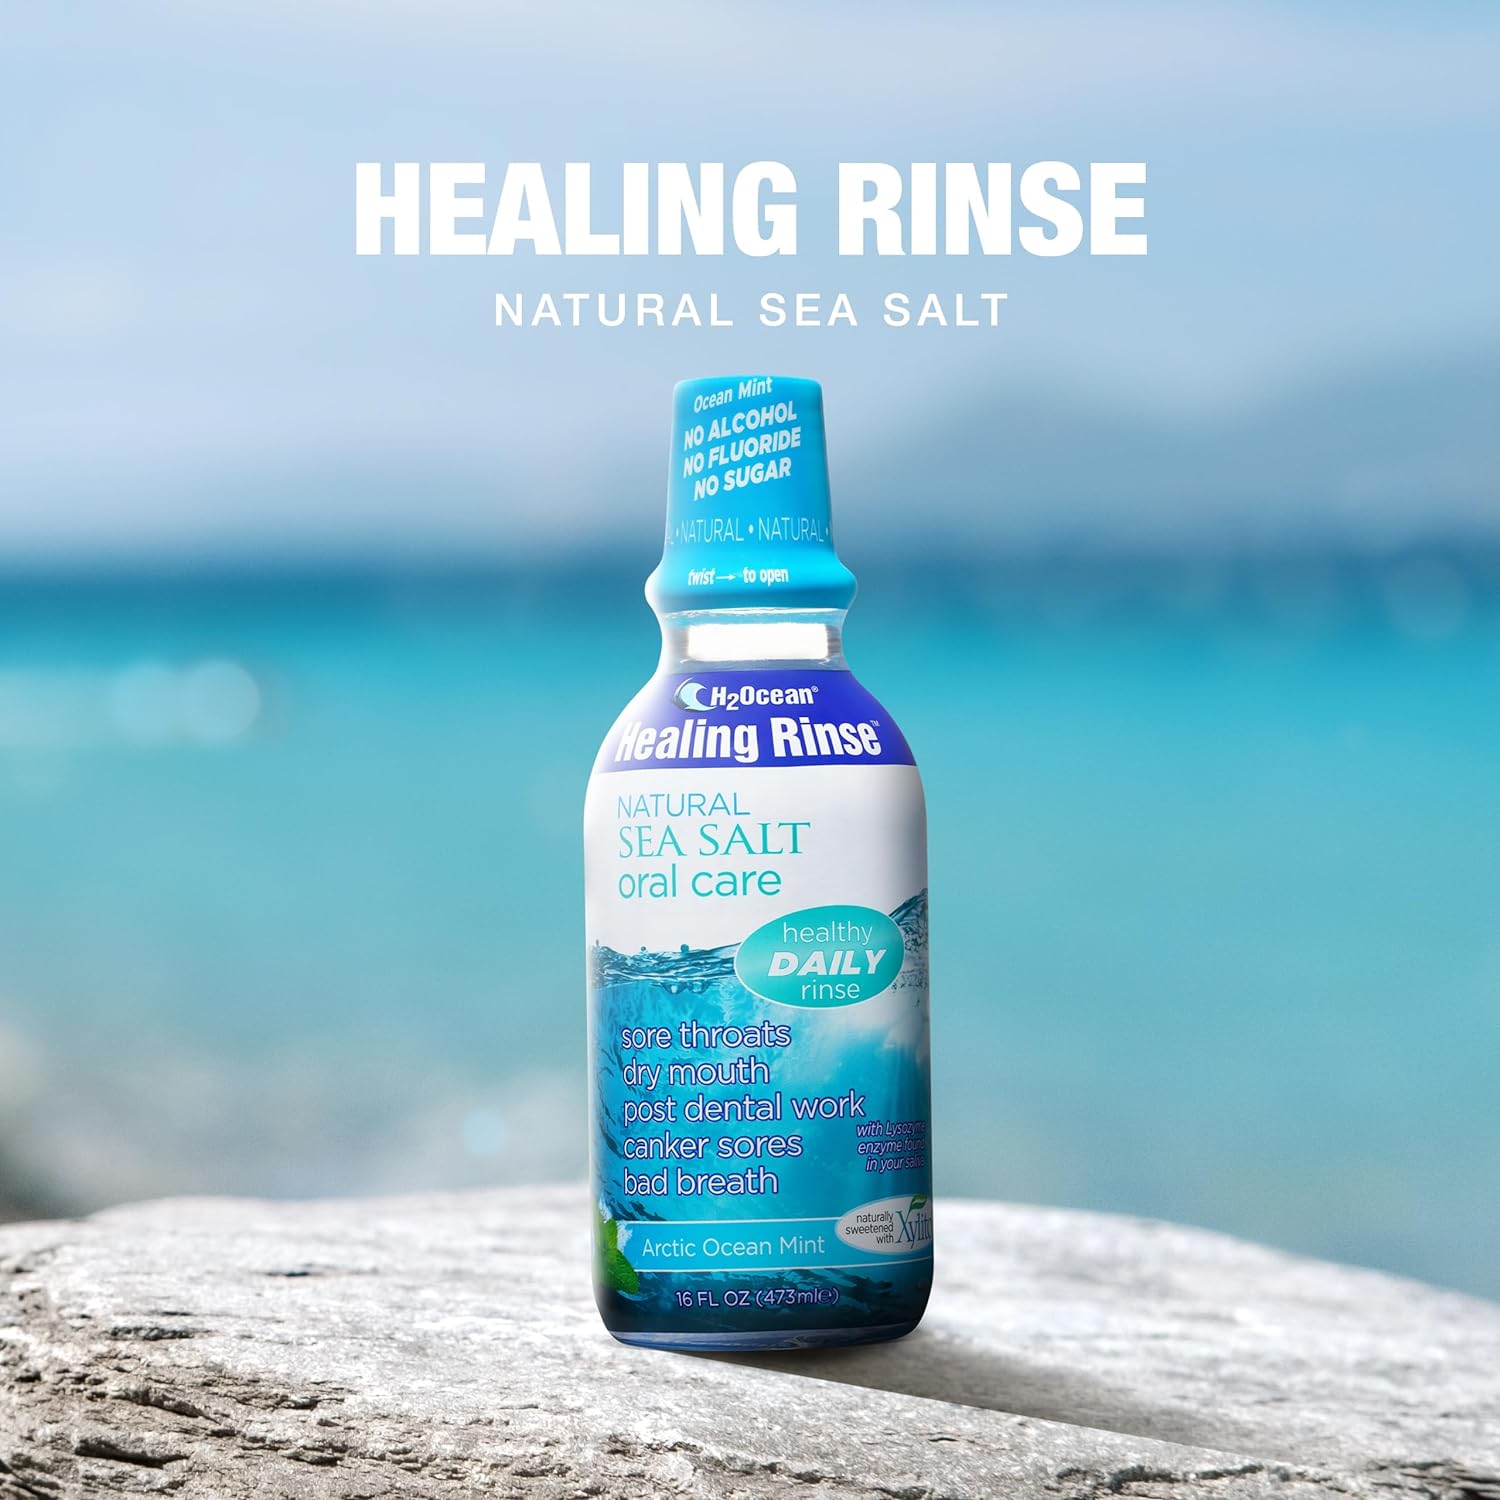 H2Ocean Healing Rinse Natural Sea Salt Oral Care - Mouth Rinse for Oral Care - Great for Piercings, Sore Throats & Gum Health - Alcohol- & Fluoride-Free Mouthwash - Arctic Ocean Mint, 16 oz : Xylitol Mouthwash : Health & Household